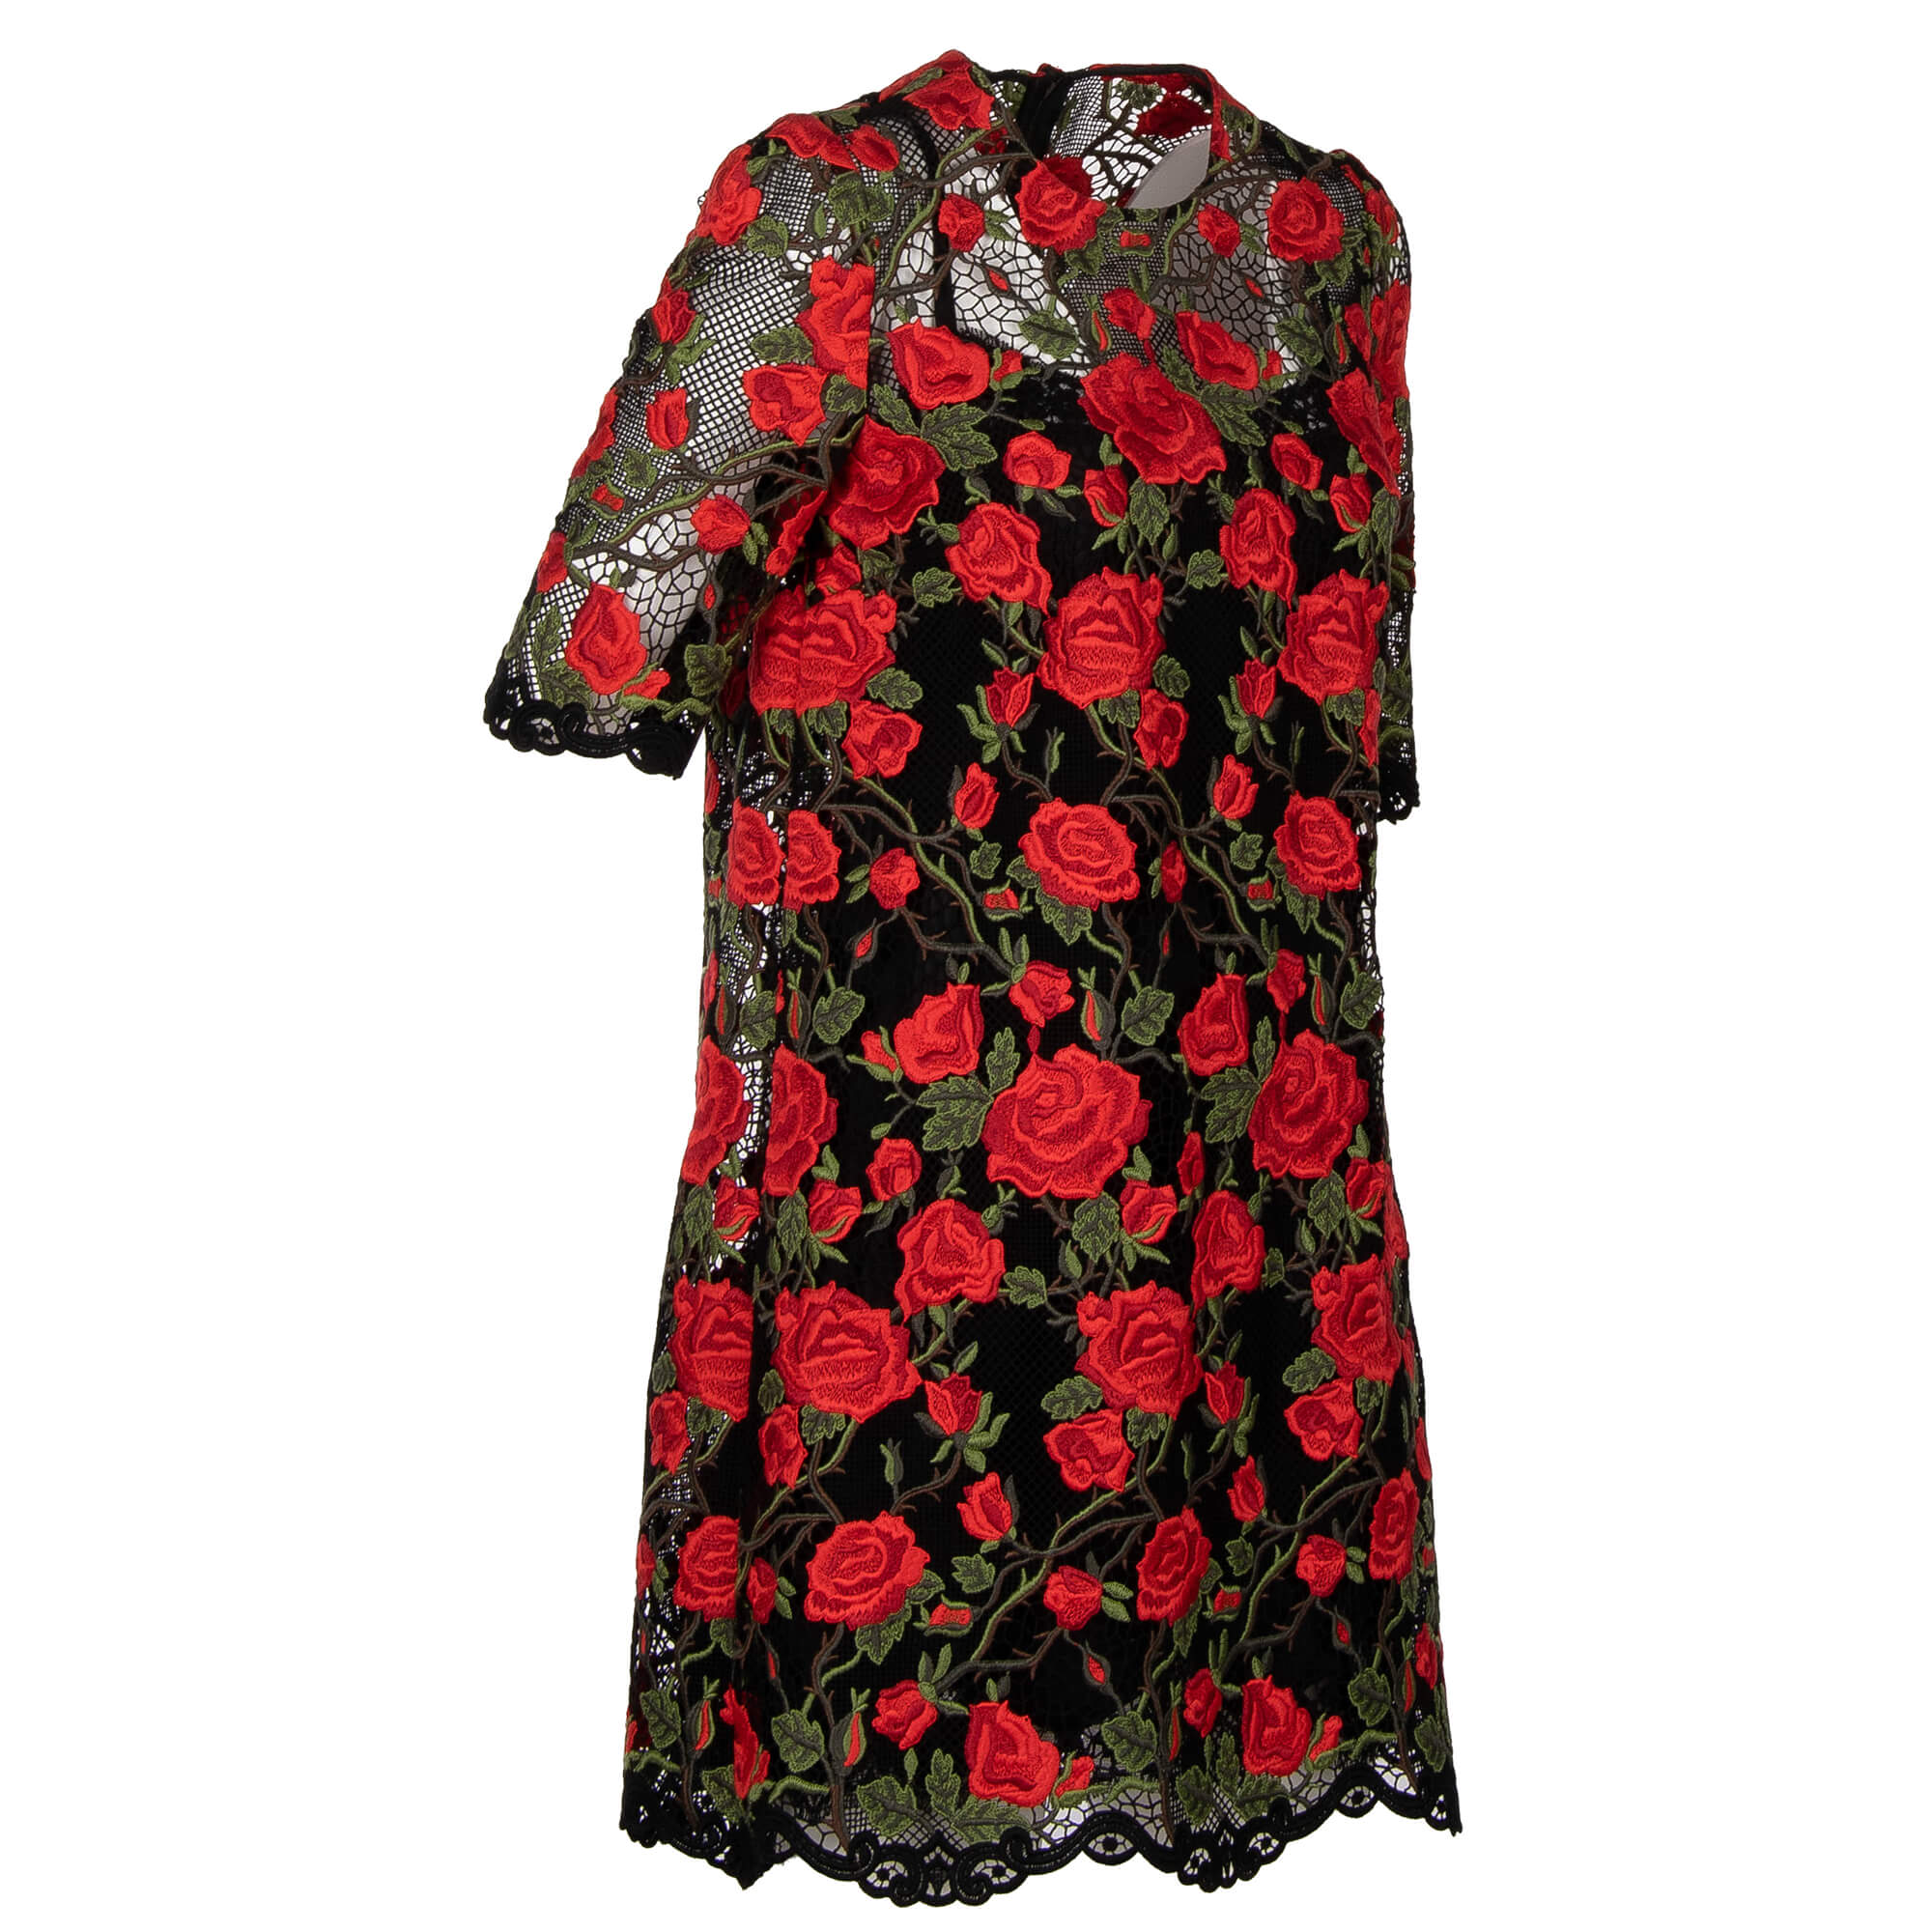 Top 73+ imagen dolce and gabbana red rose dress - Abzlocal.mx